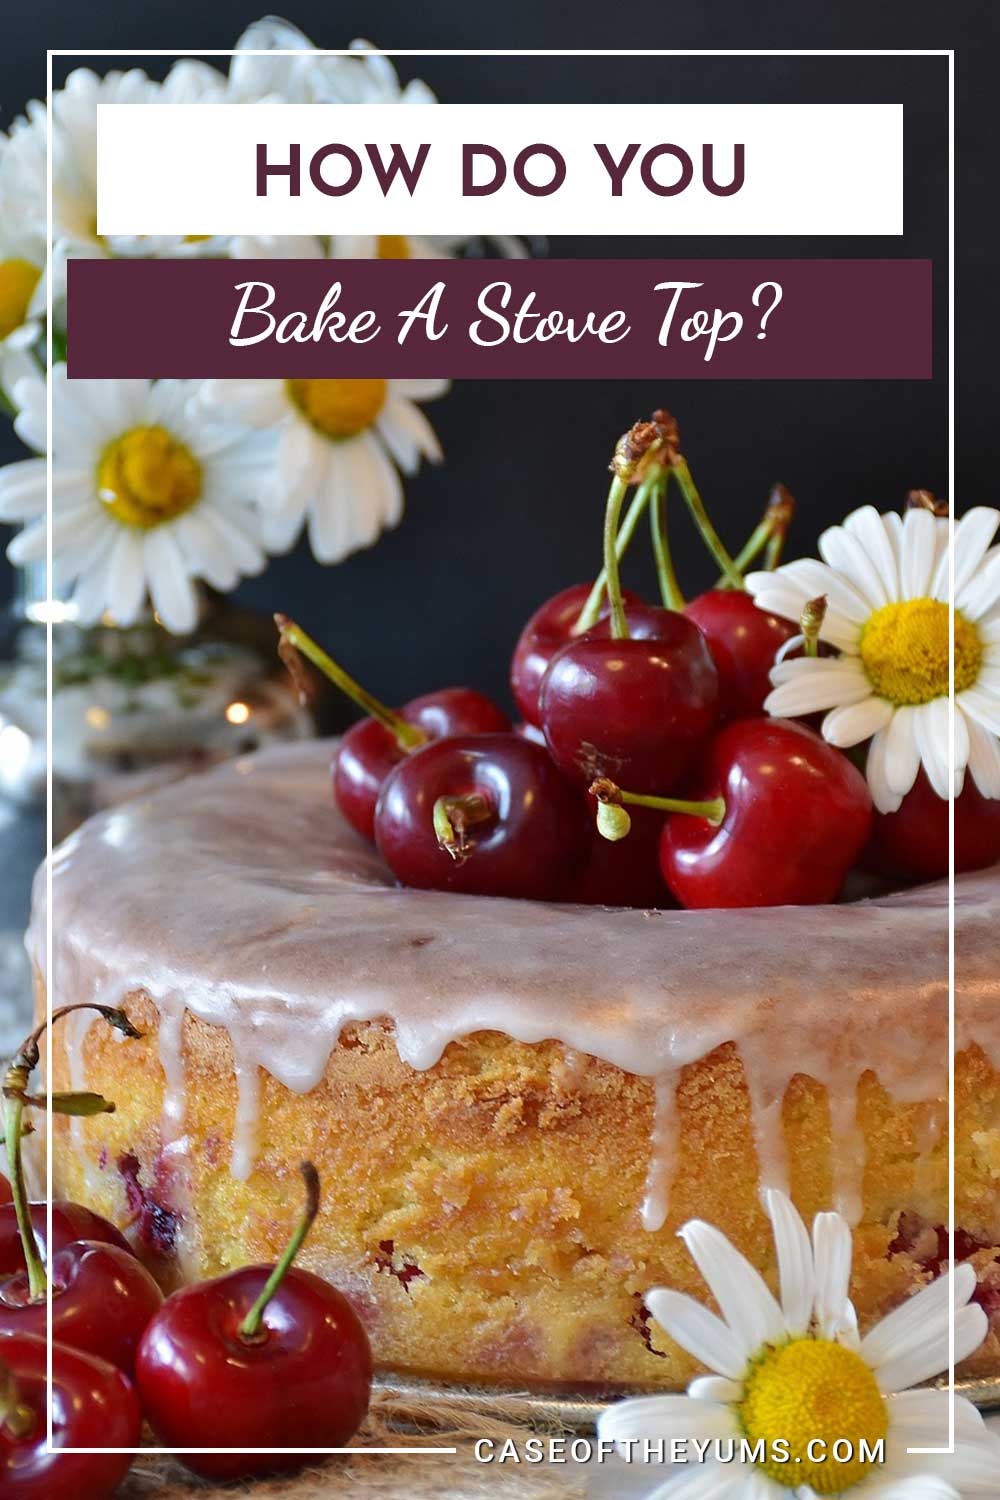 Cherries on a cake - How Do You Bake A Stove Top?